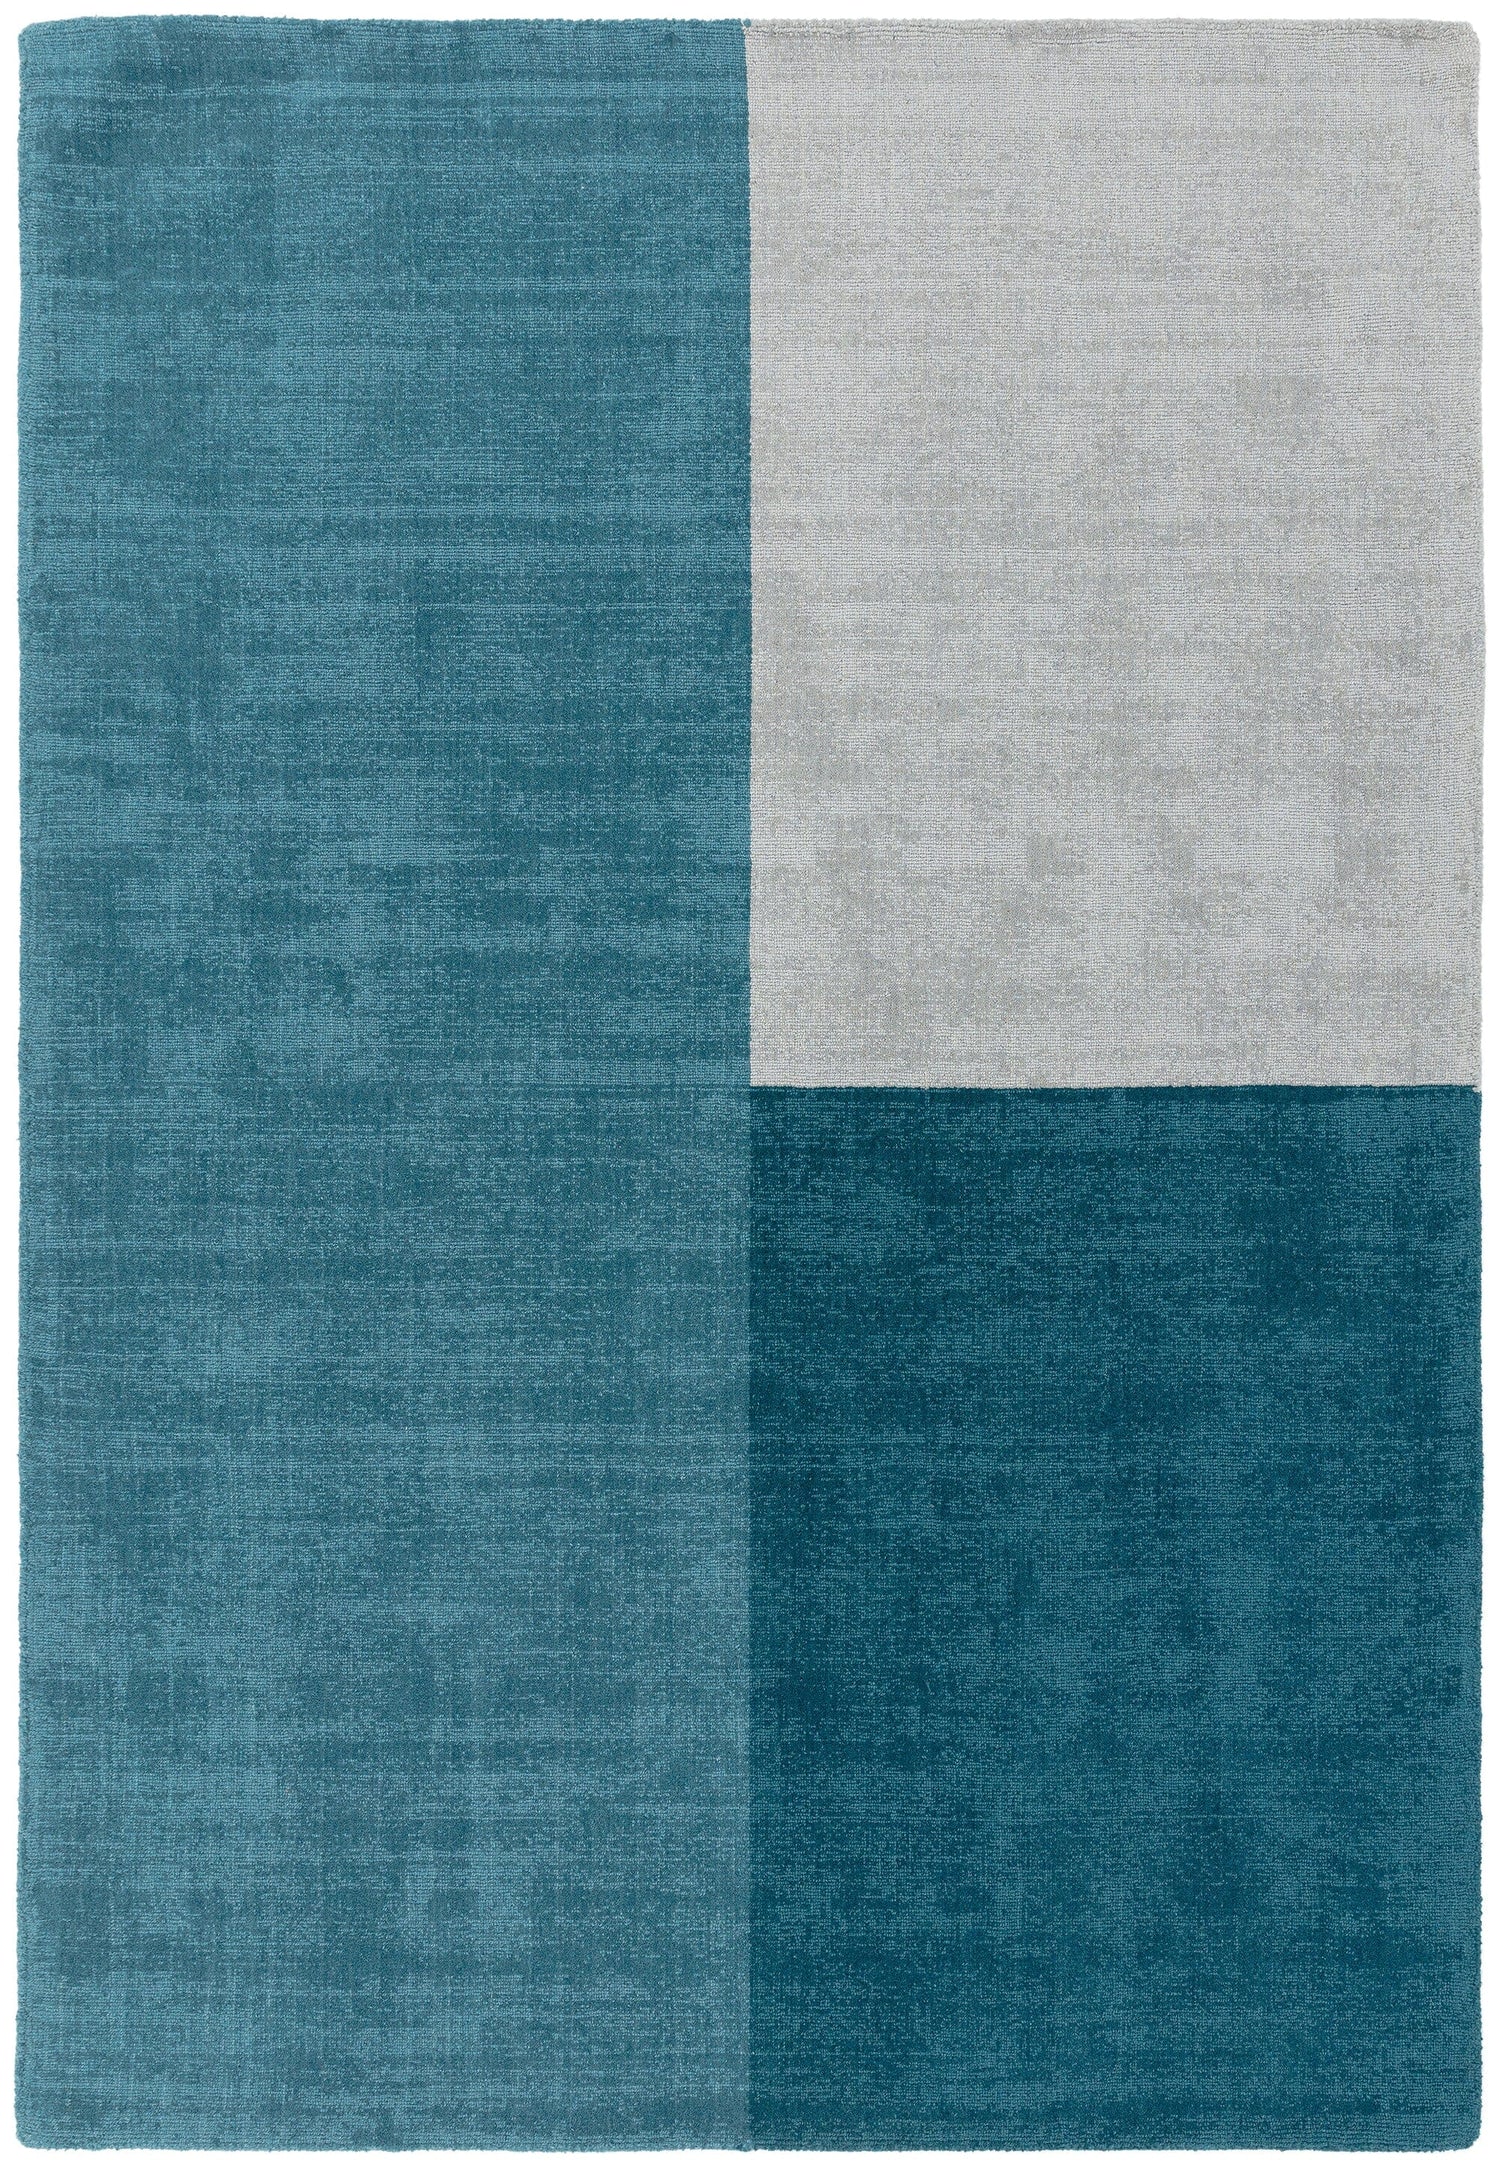  Asiatic Carpets-Asiatic Carpets Blox Hand Woven Rug Teal - 120 x 170cm-Multicoloured 405 